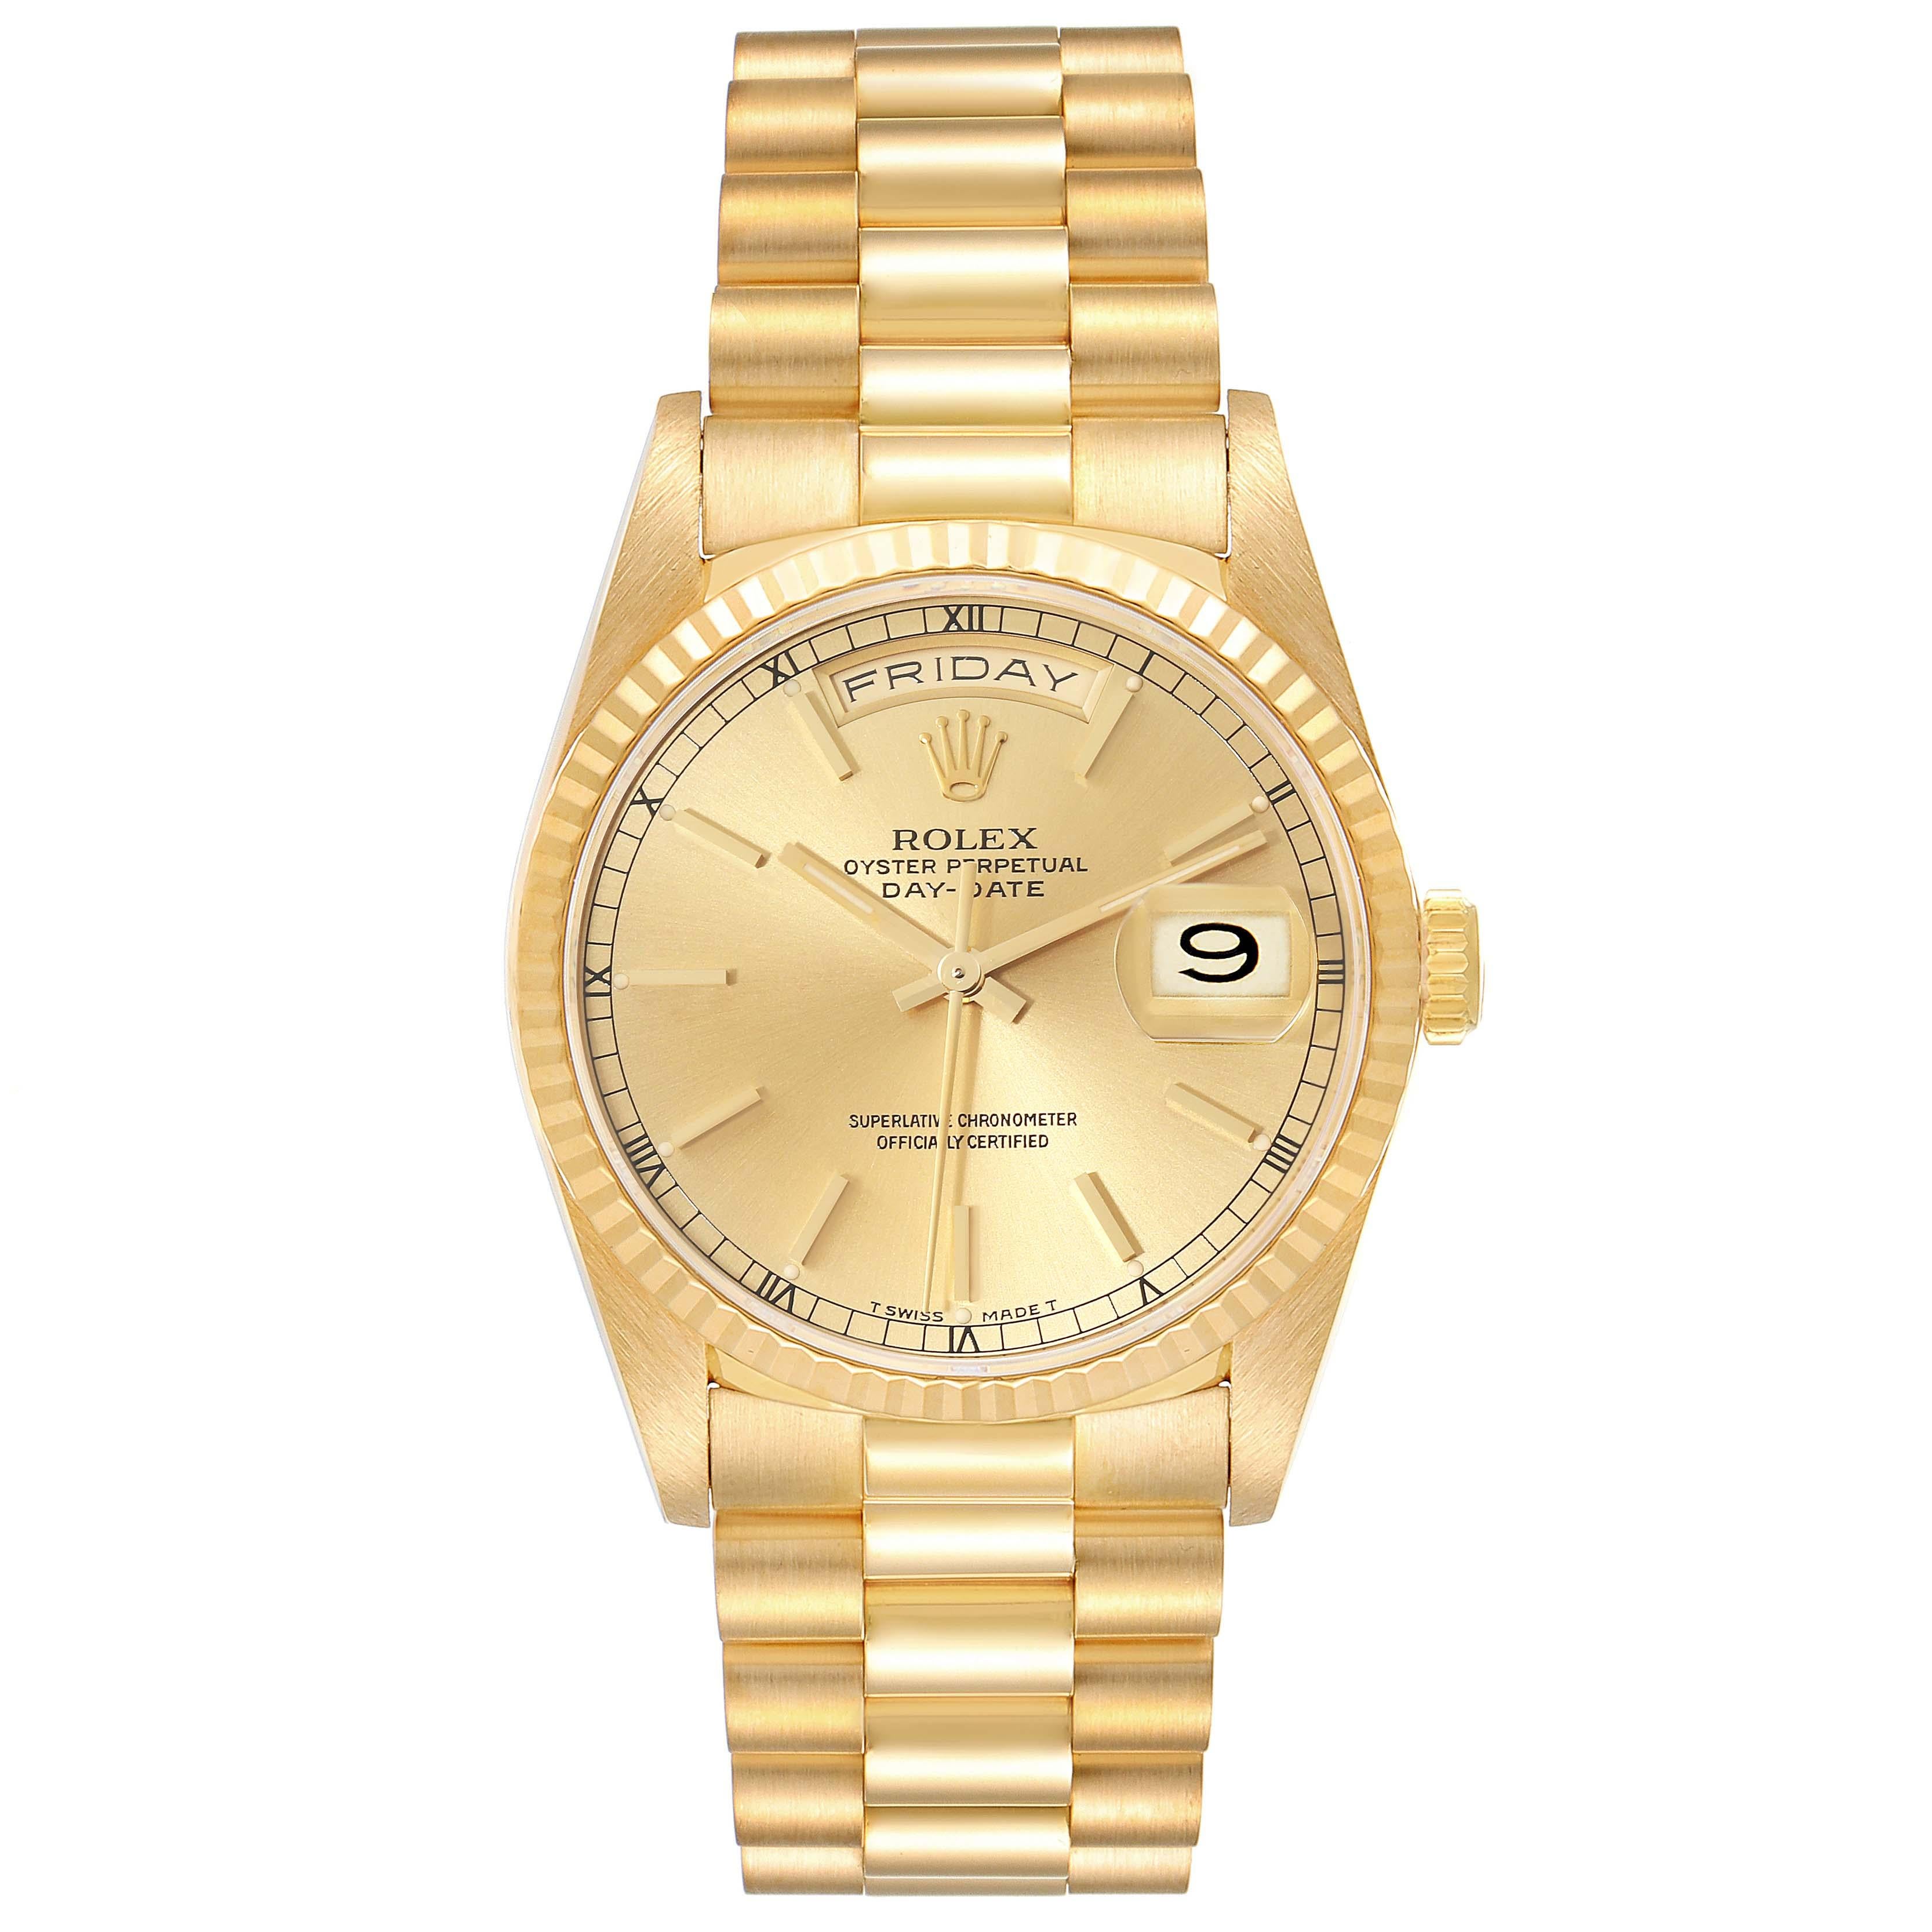 Rolex President Day-Date Yellow Gold Champagne Dial Mens Watch 18238. Officially certified chronometer automatic self-winding movement. 18k yellow gold oyster case 36.0 mm in diameter.  Rolex logo on the crown. 18K yellow gold fluted bezel. Scratch